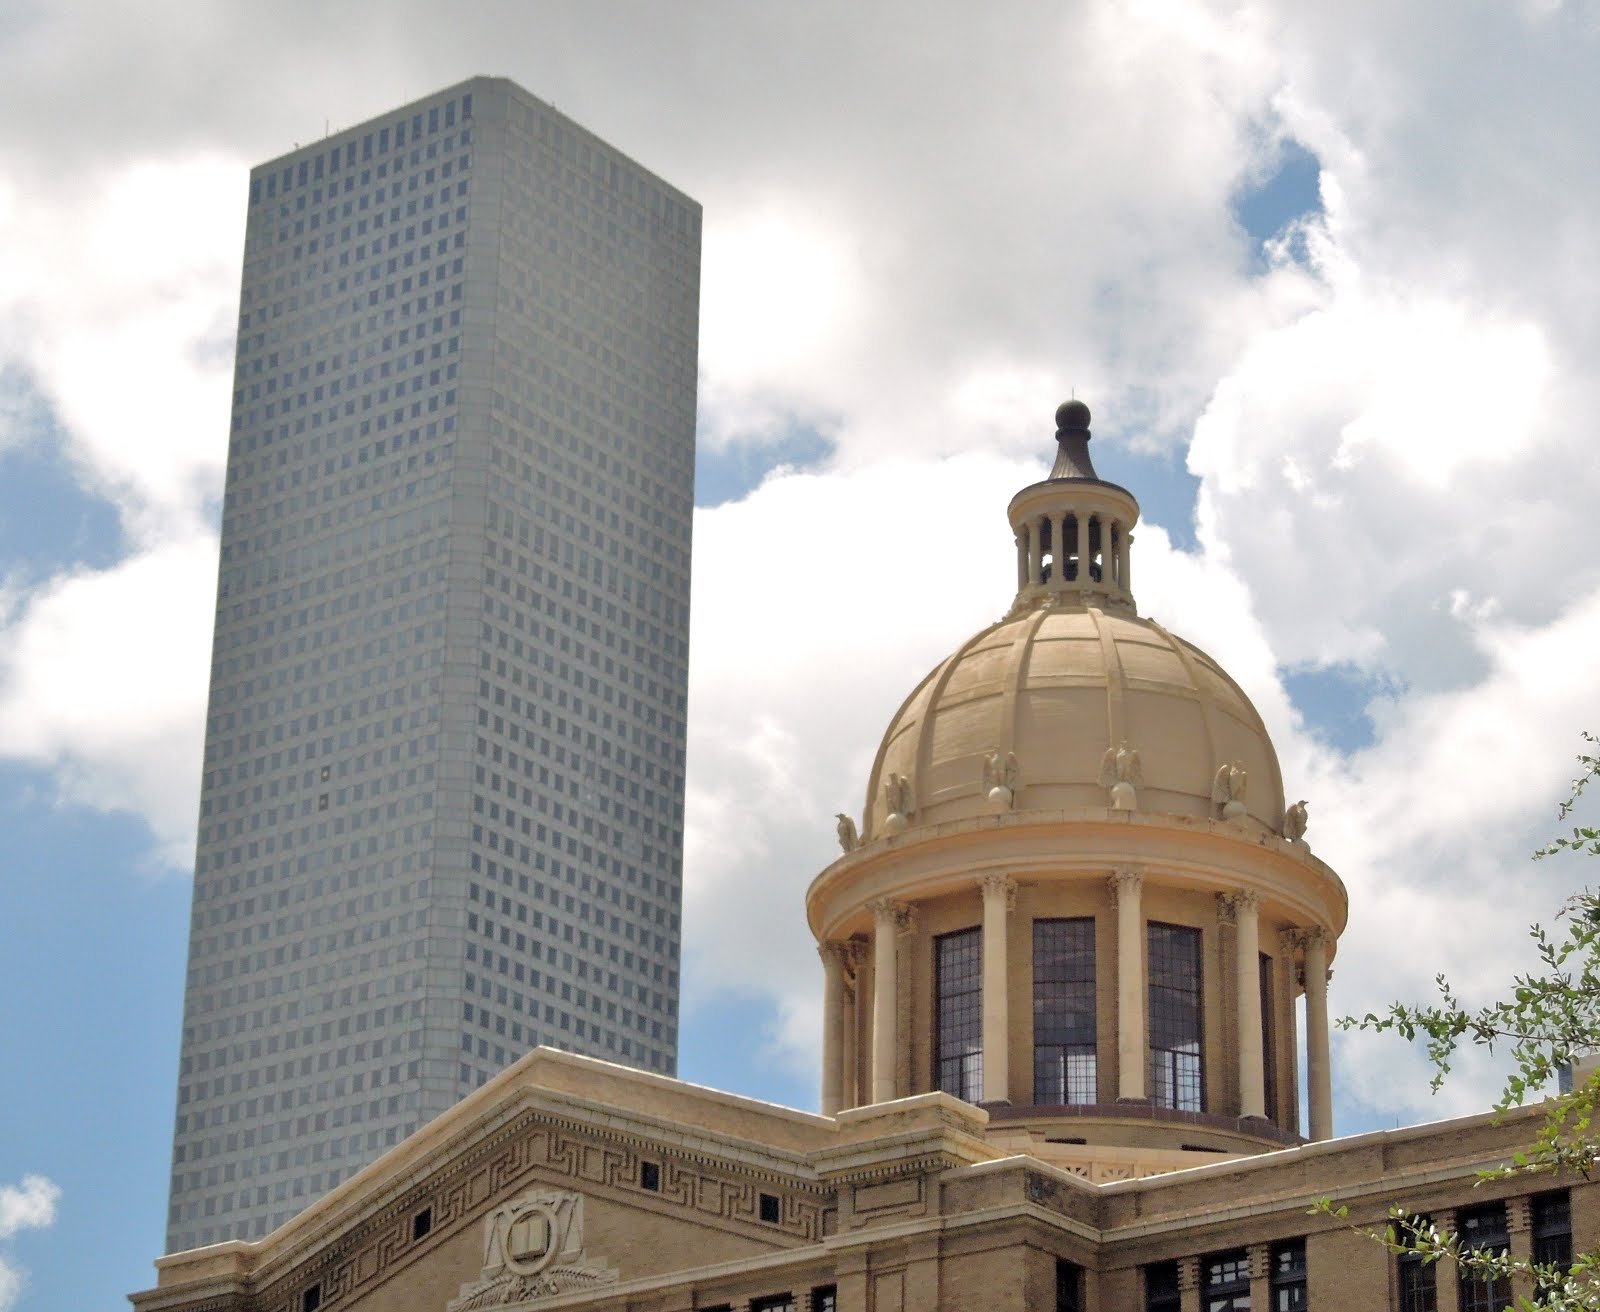 1910 Harris County Courthouse with Chase Tower